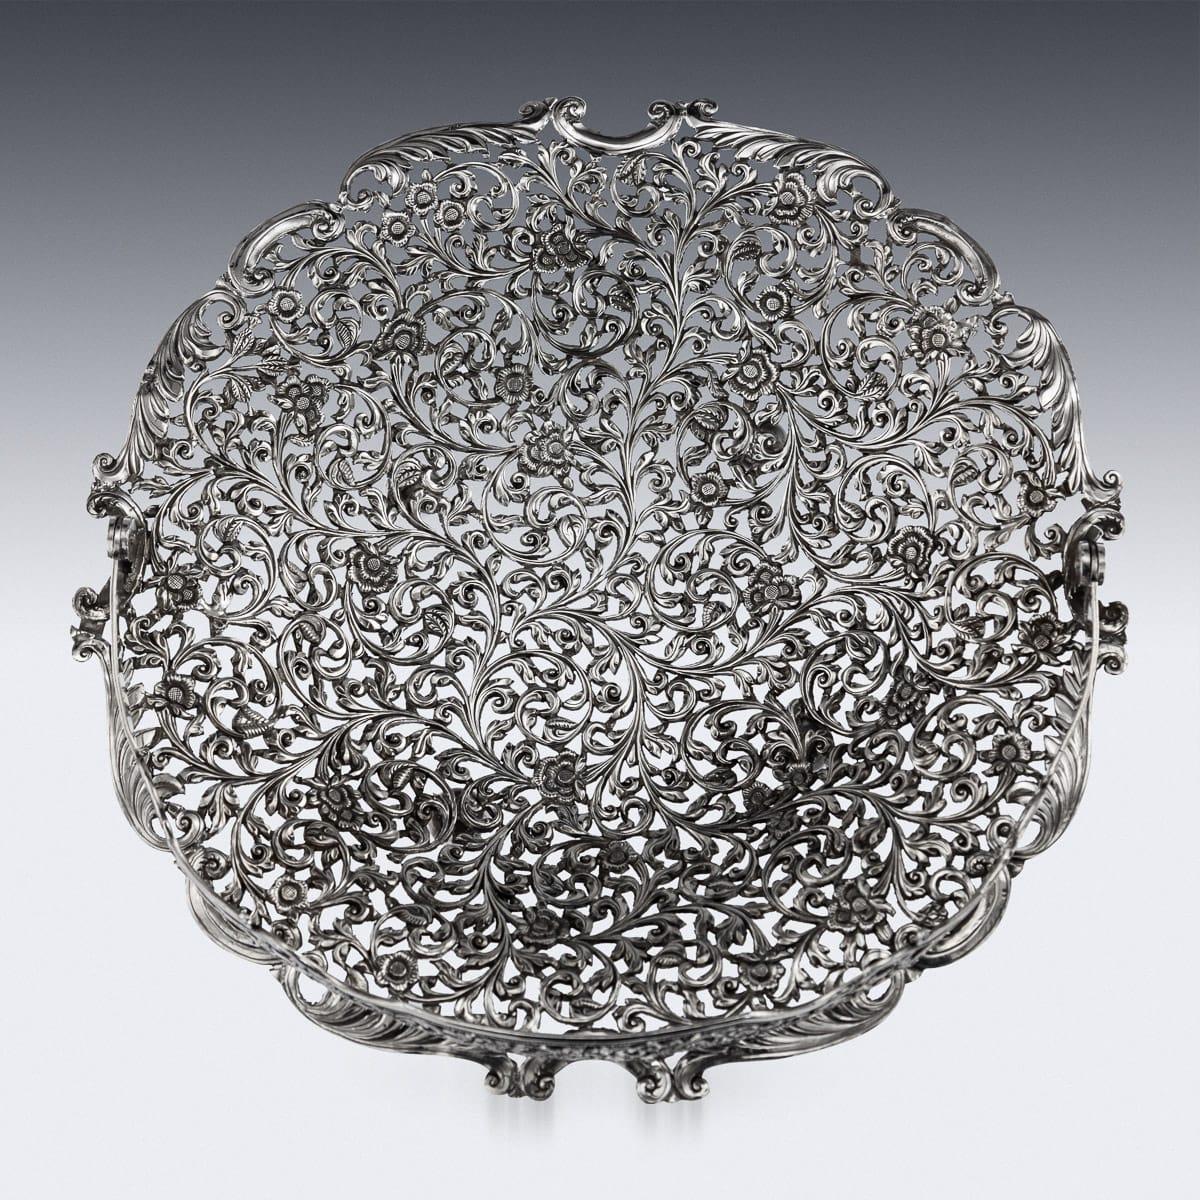 Antique 19th century Indian Kutch (Cutch), Bhuj, Gujarat region hand crafted and pierced solid silver basket, of shaped round form on four ball feet, finely chased and pierced with scrolling leaves and flower pattern in a finely tooled background,